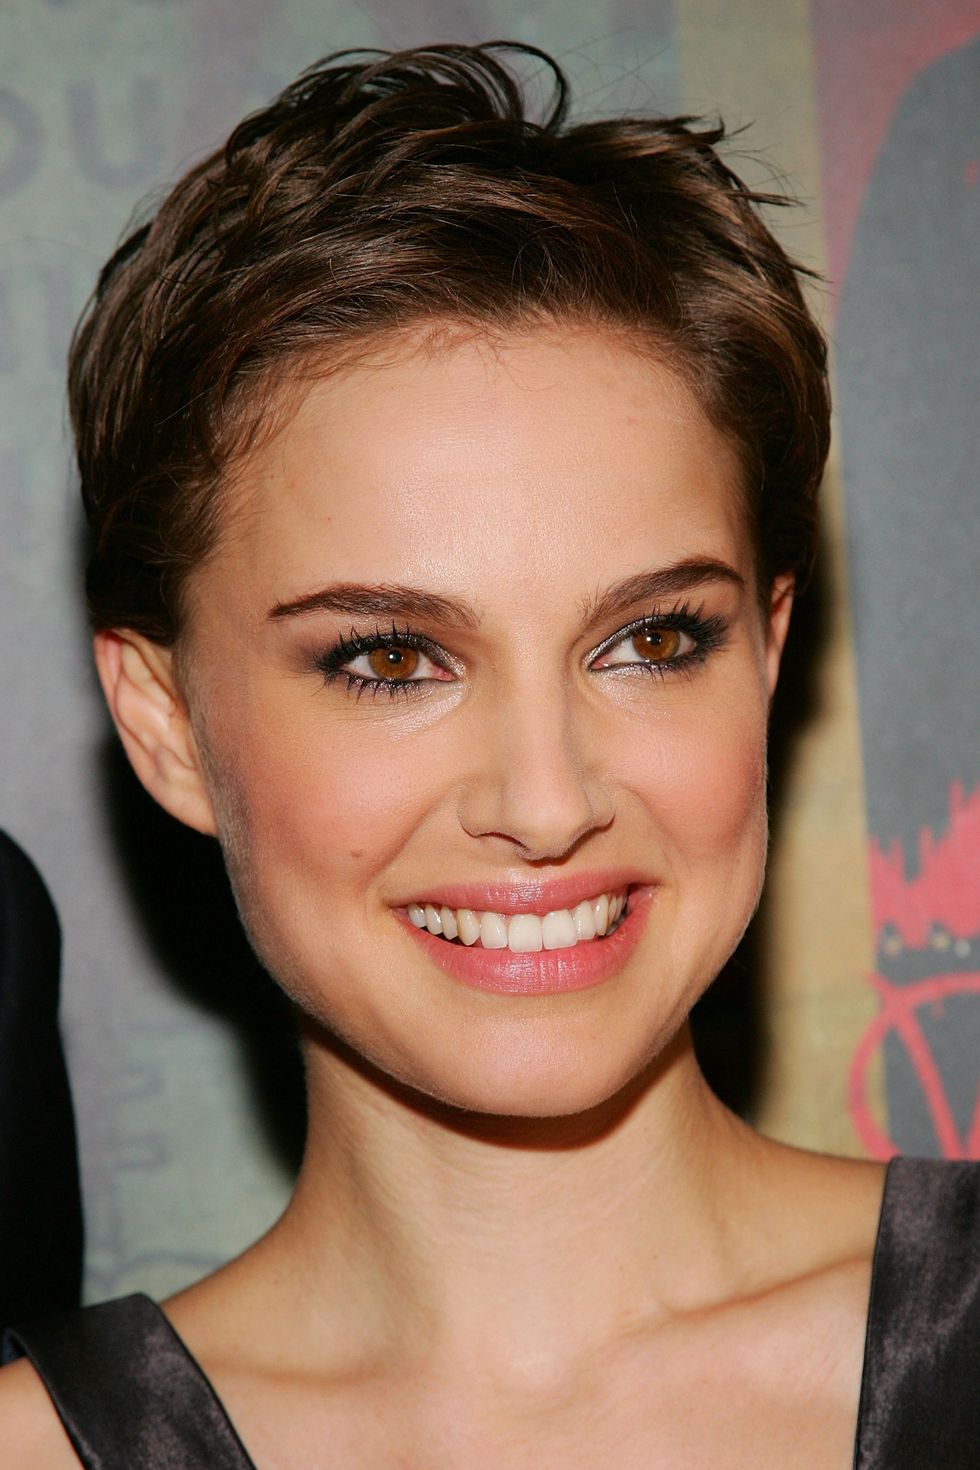 15 Best Haircuts for Thin Hair to Make It Look Thicker - Haircuts